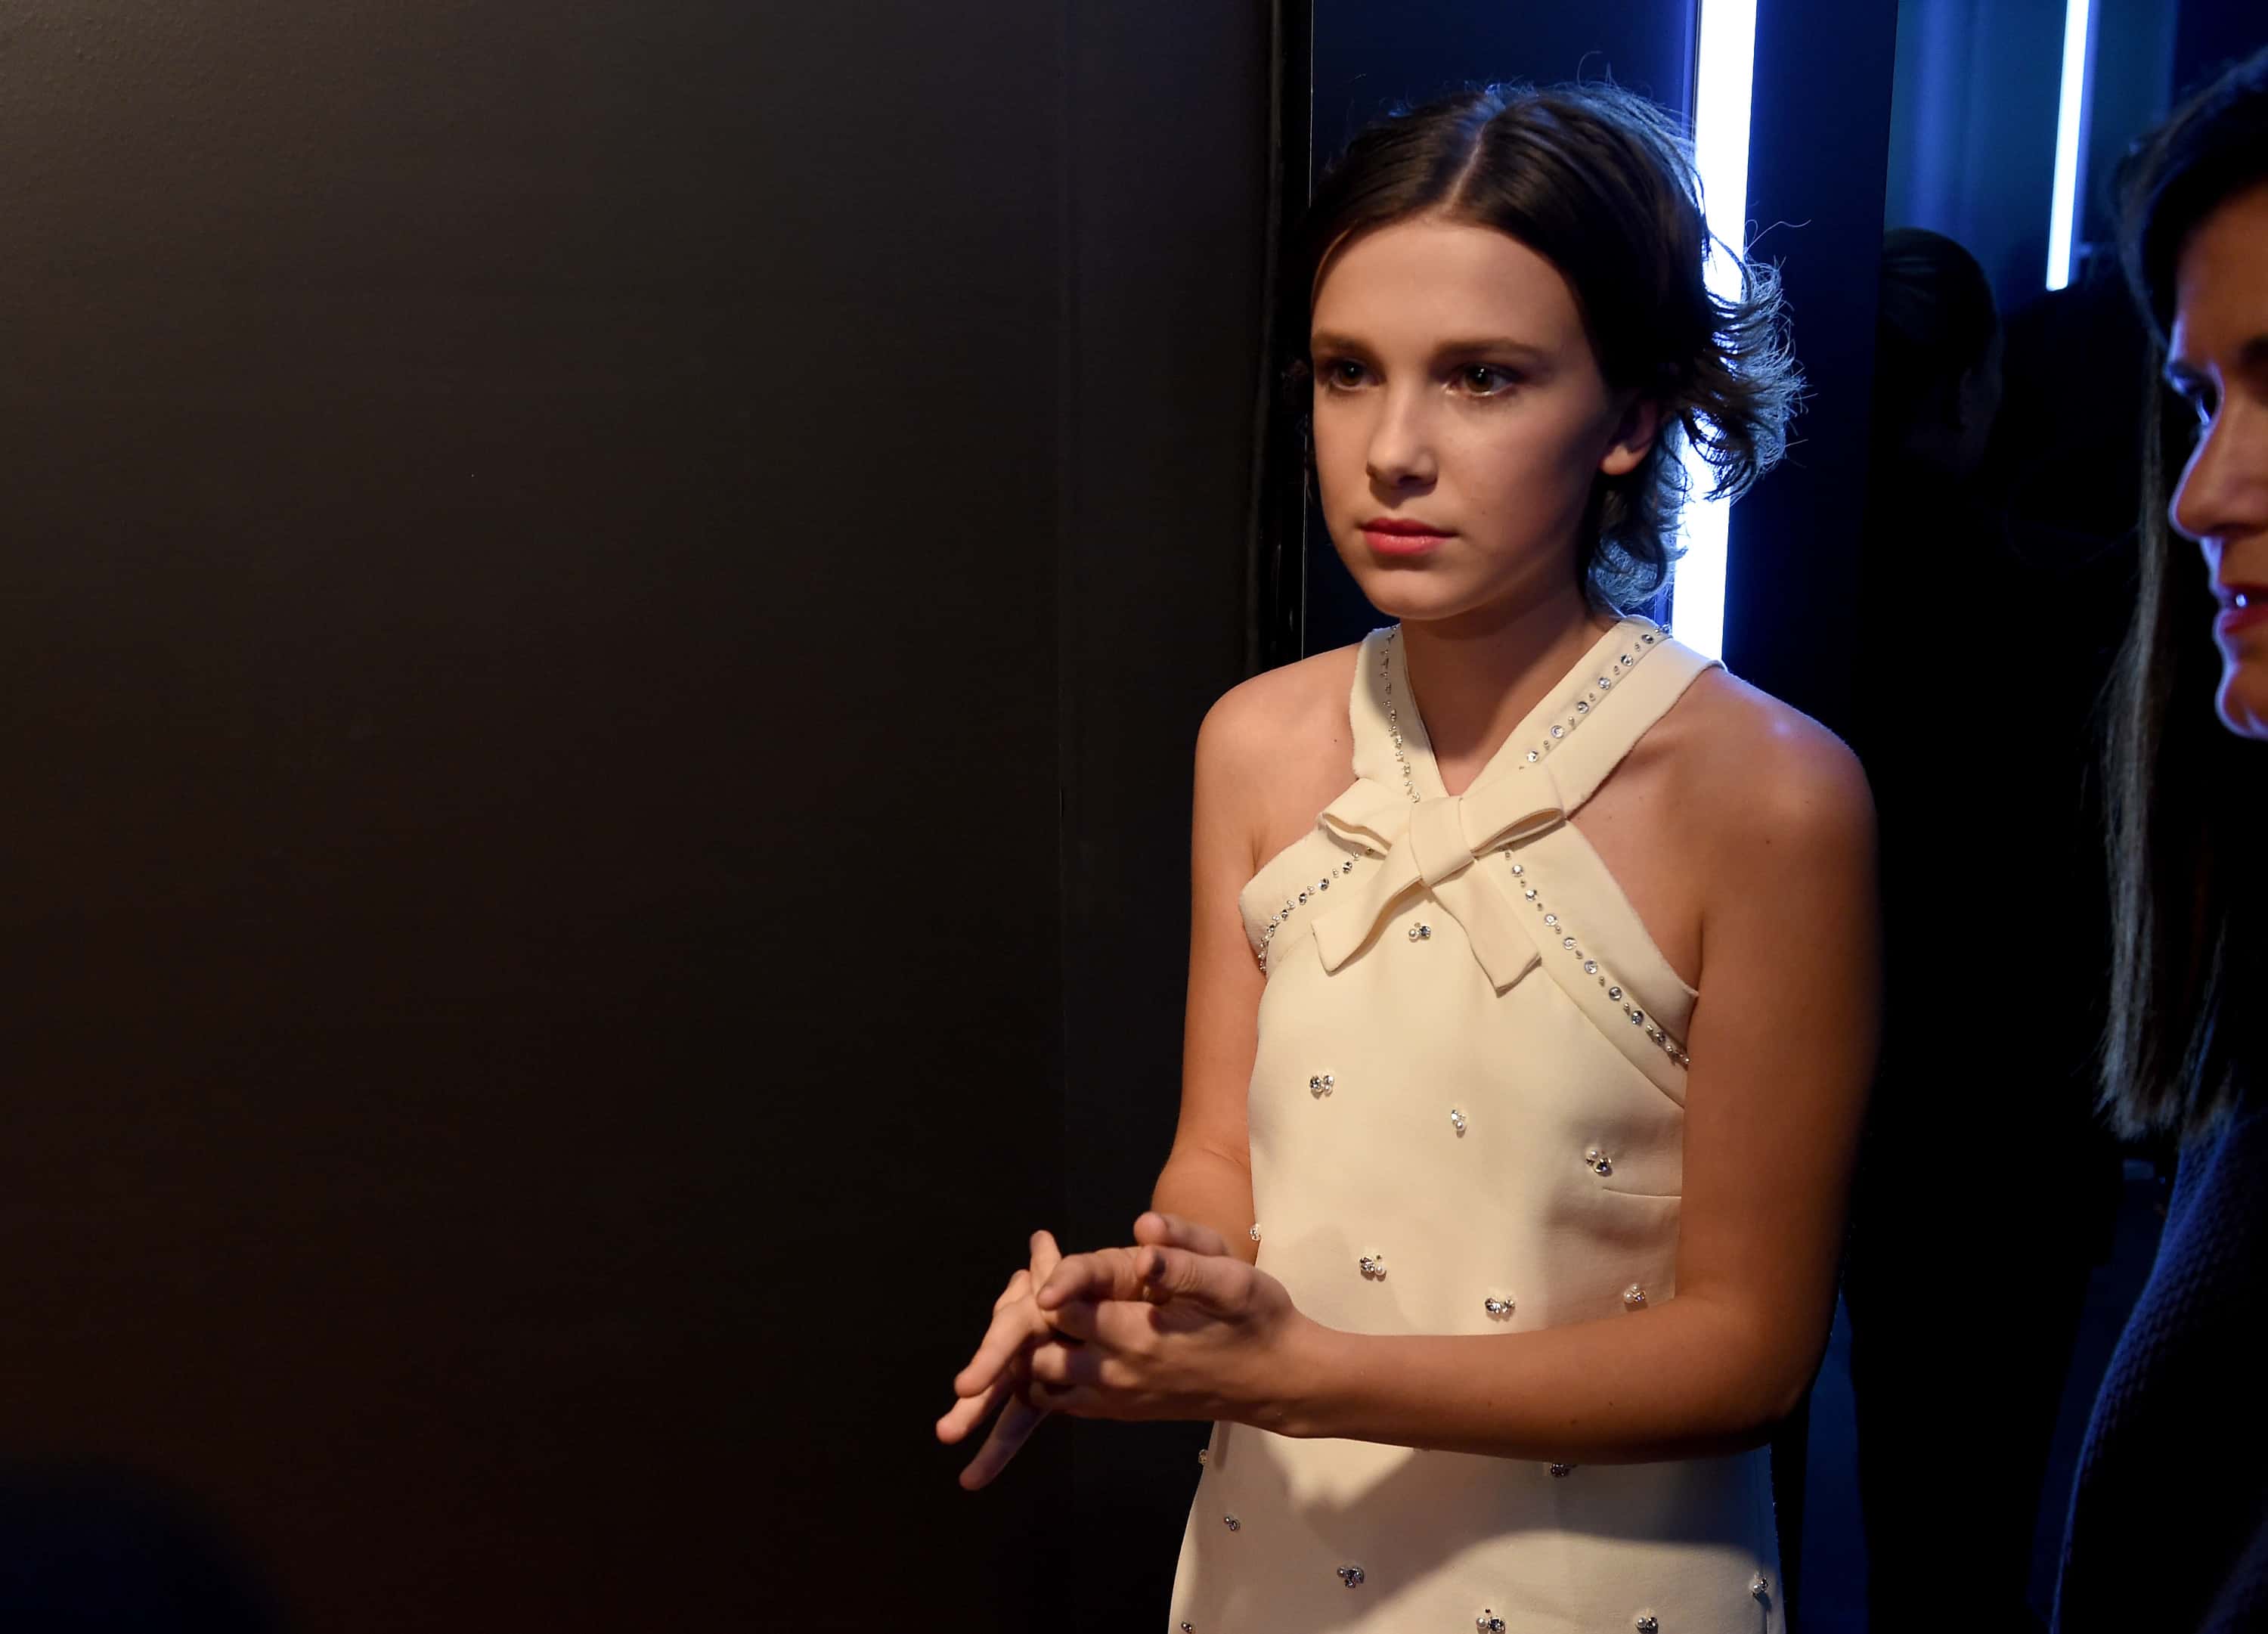 Millie Bobby Brown facts